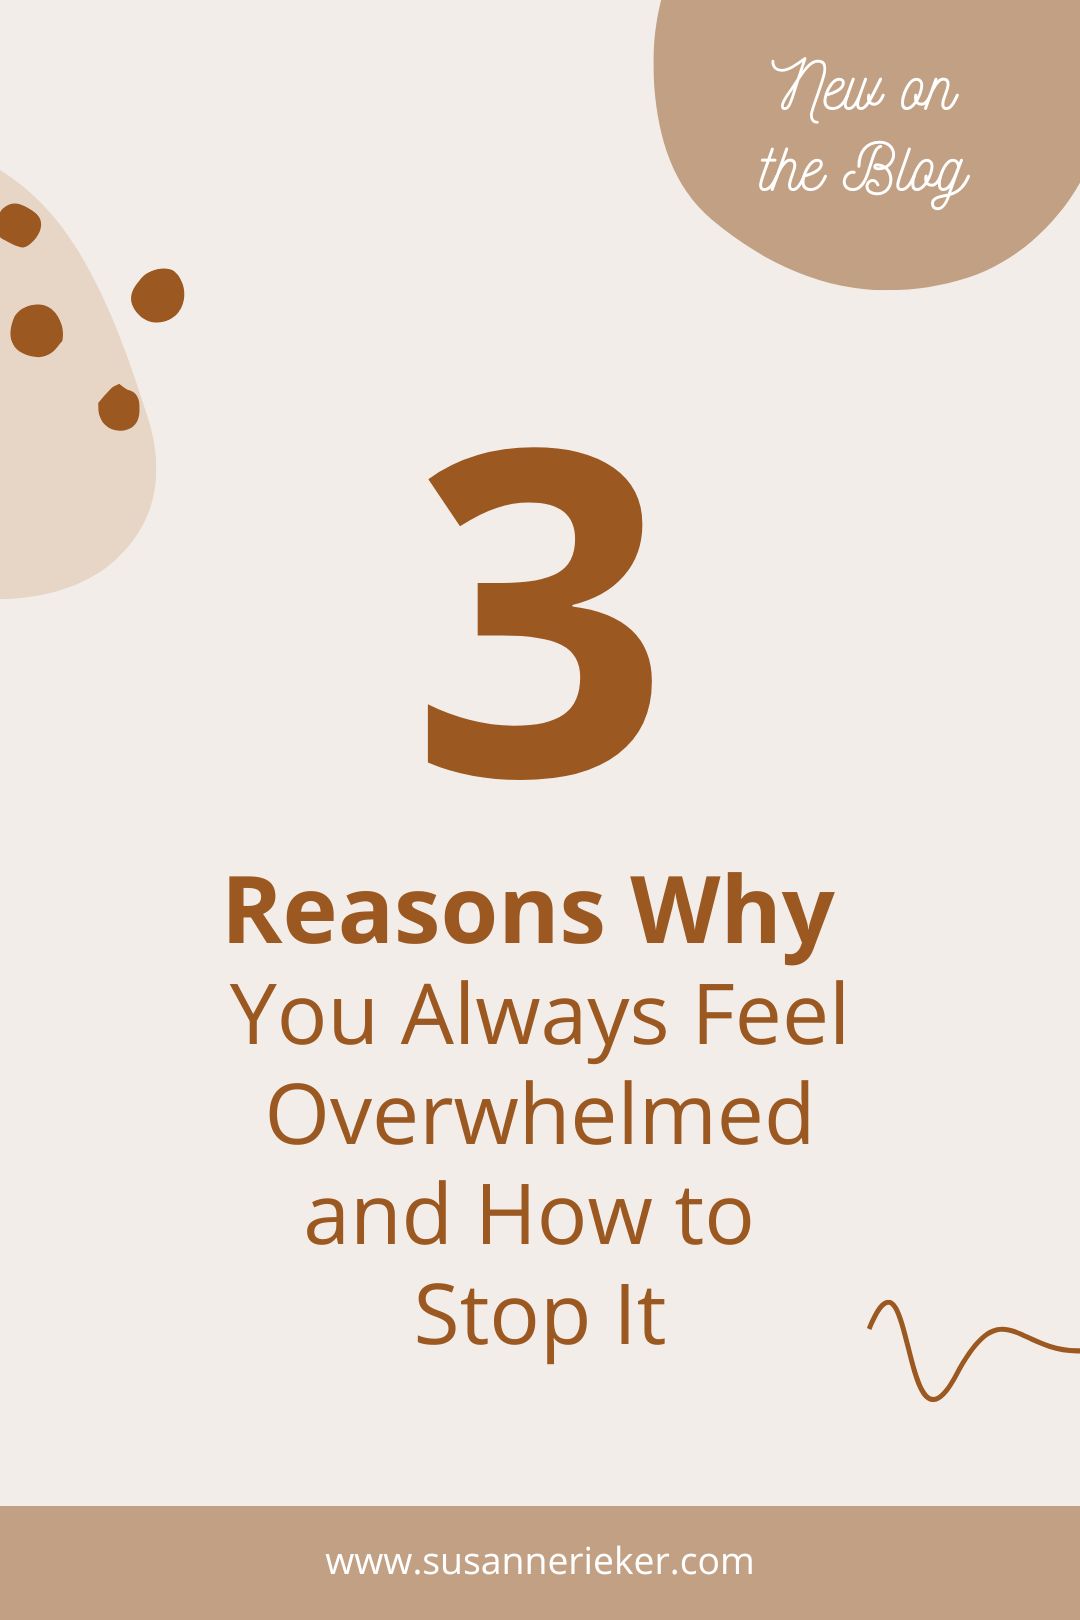 3 Reasons Why You Always Feel Overwhelmed and How to Stop It